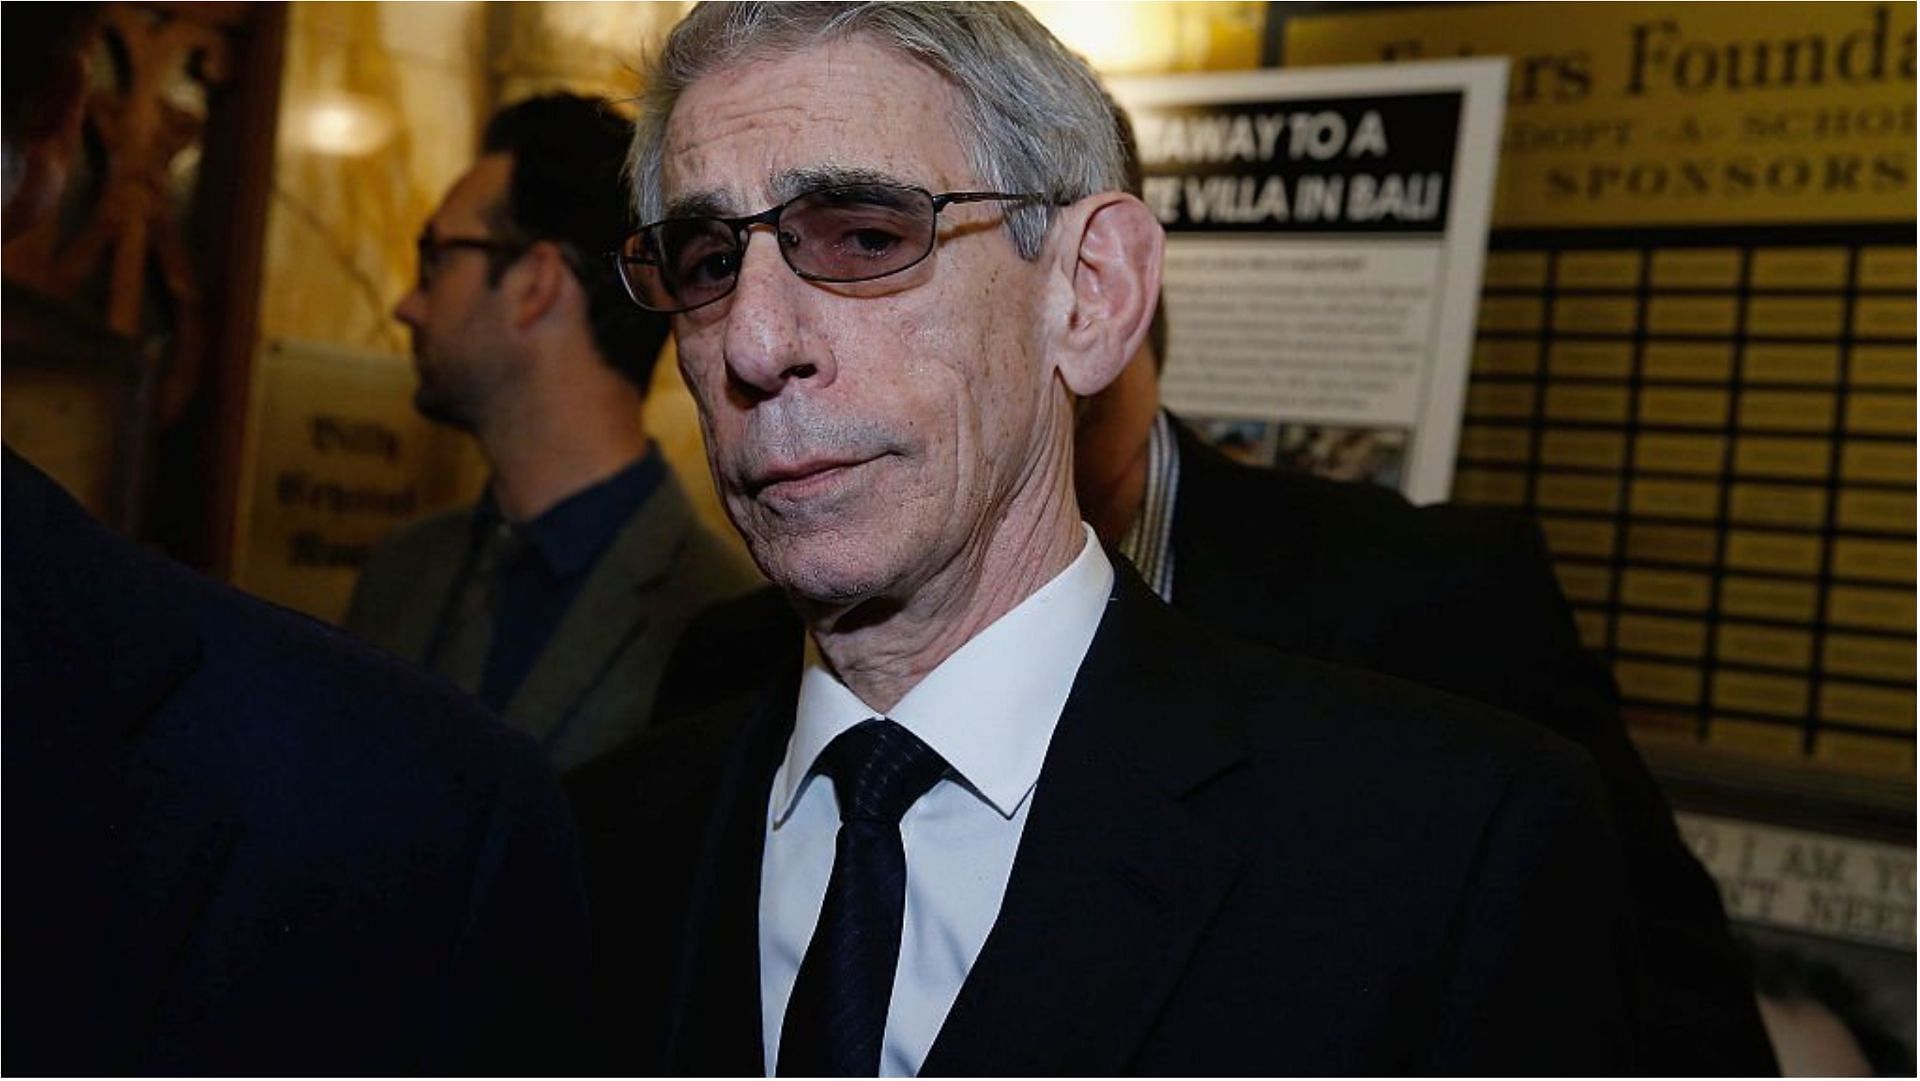 Richard Belzer recently died at the age of 78 (Image via John Lamparski/Getty Images)